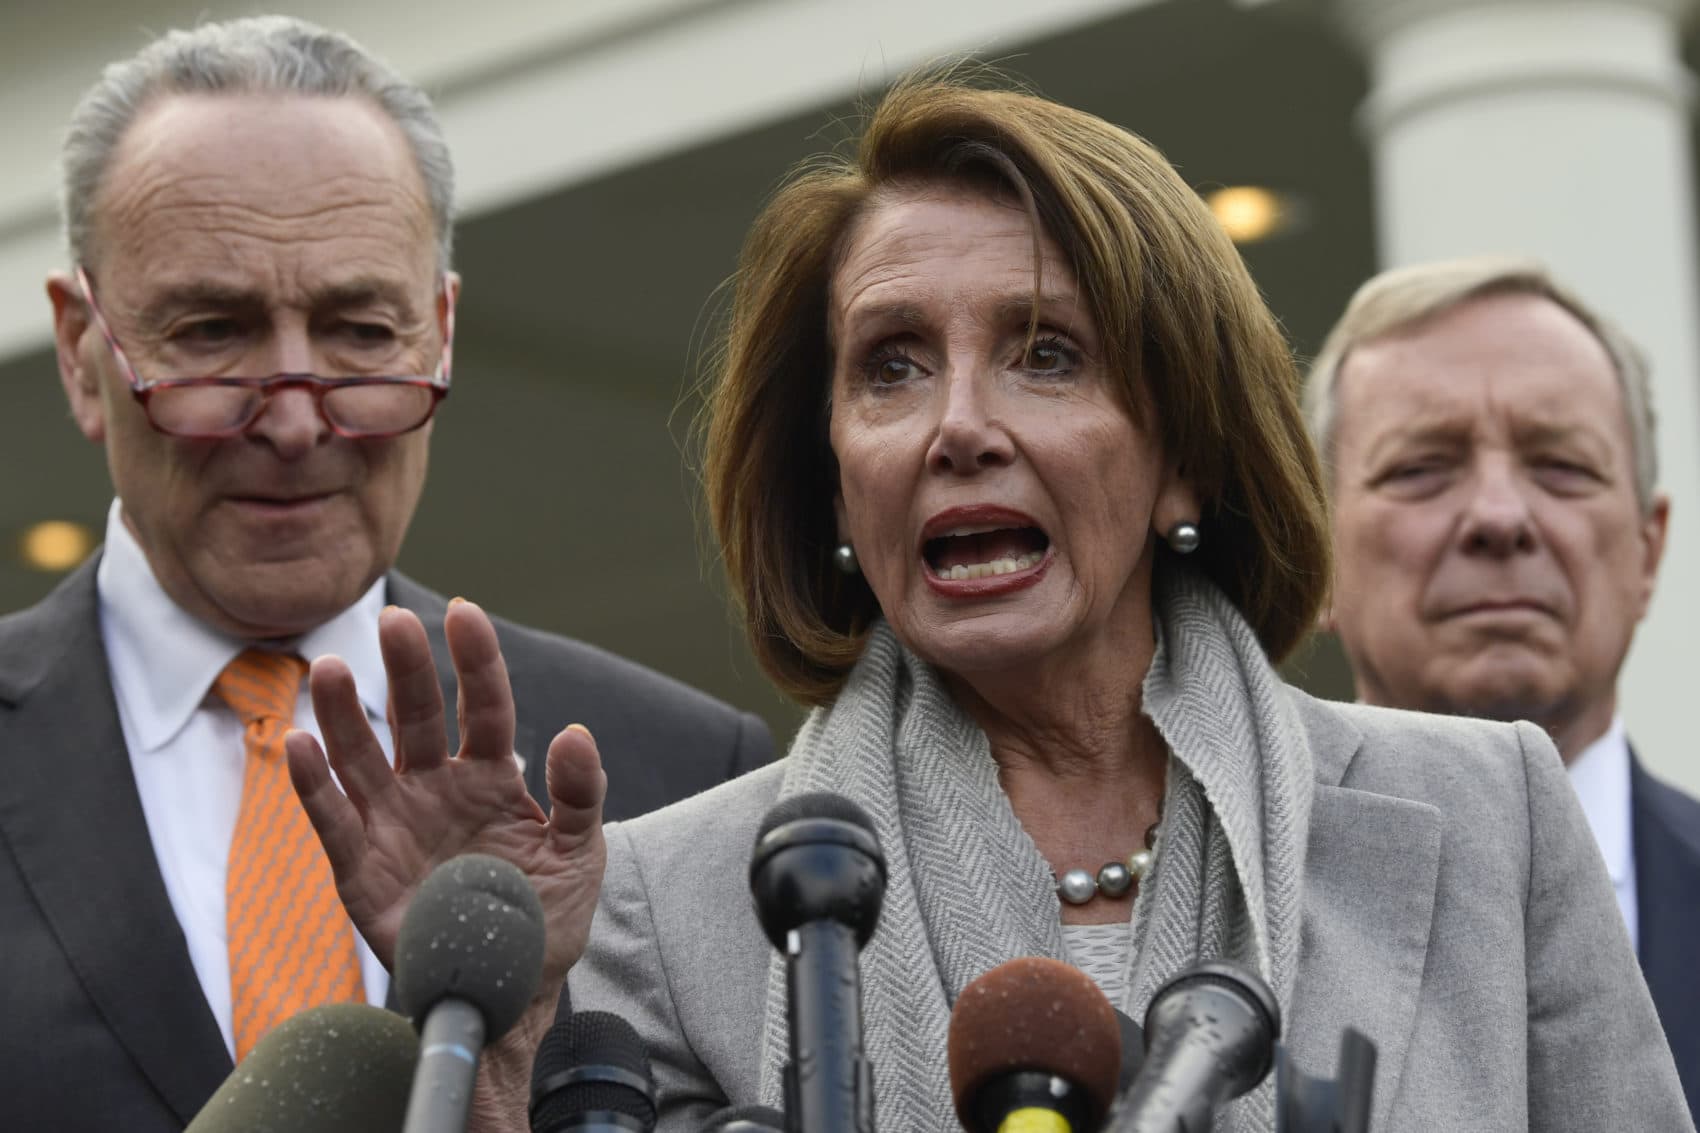 House Speaker Nancy Pelosi of Calif., center, speaks as she stands next to Senate Minority Leader Sen. Chuck Schumer of N.Y., left, and Sen. Dick Durbin, D-Ill., right, following their meeting with President Trump at the White House in Washington, Wednesday, Jan. 9, 2019. (Susan Walsh/AP)